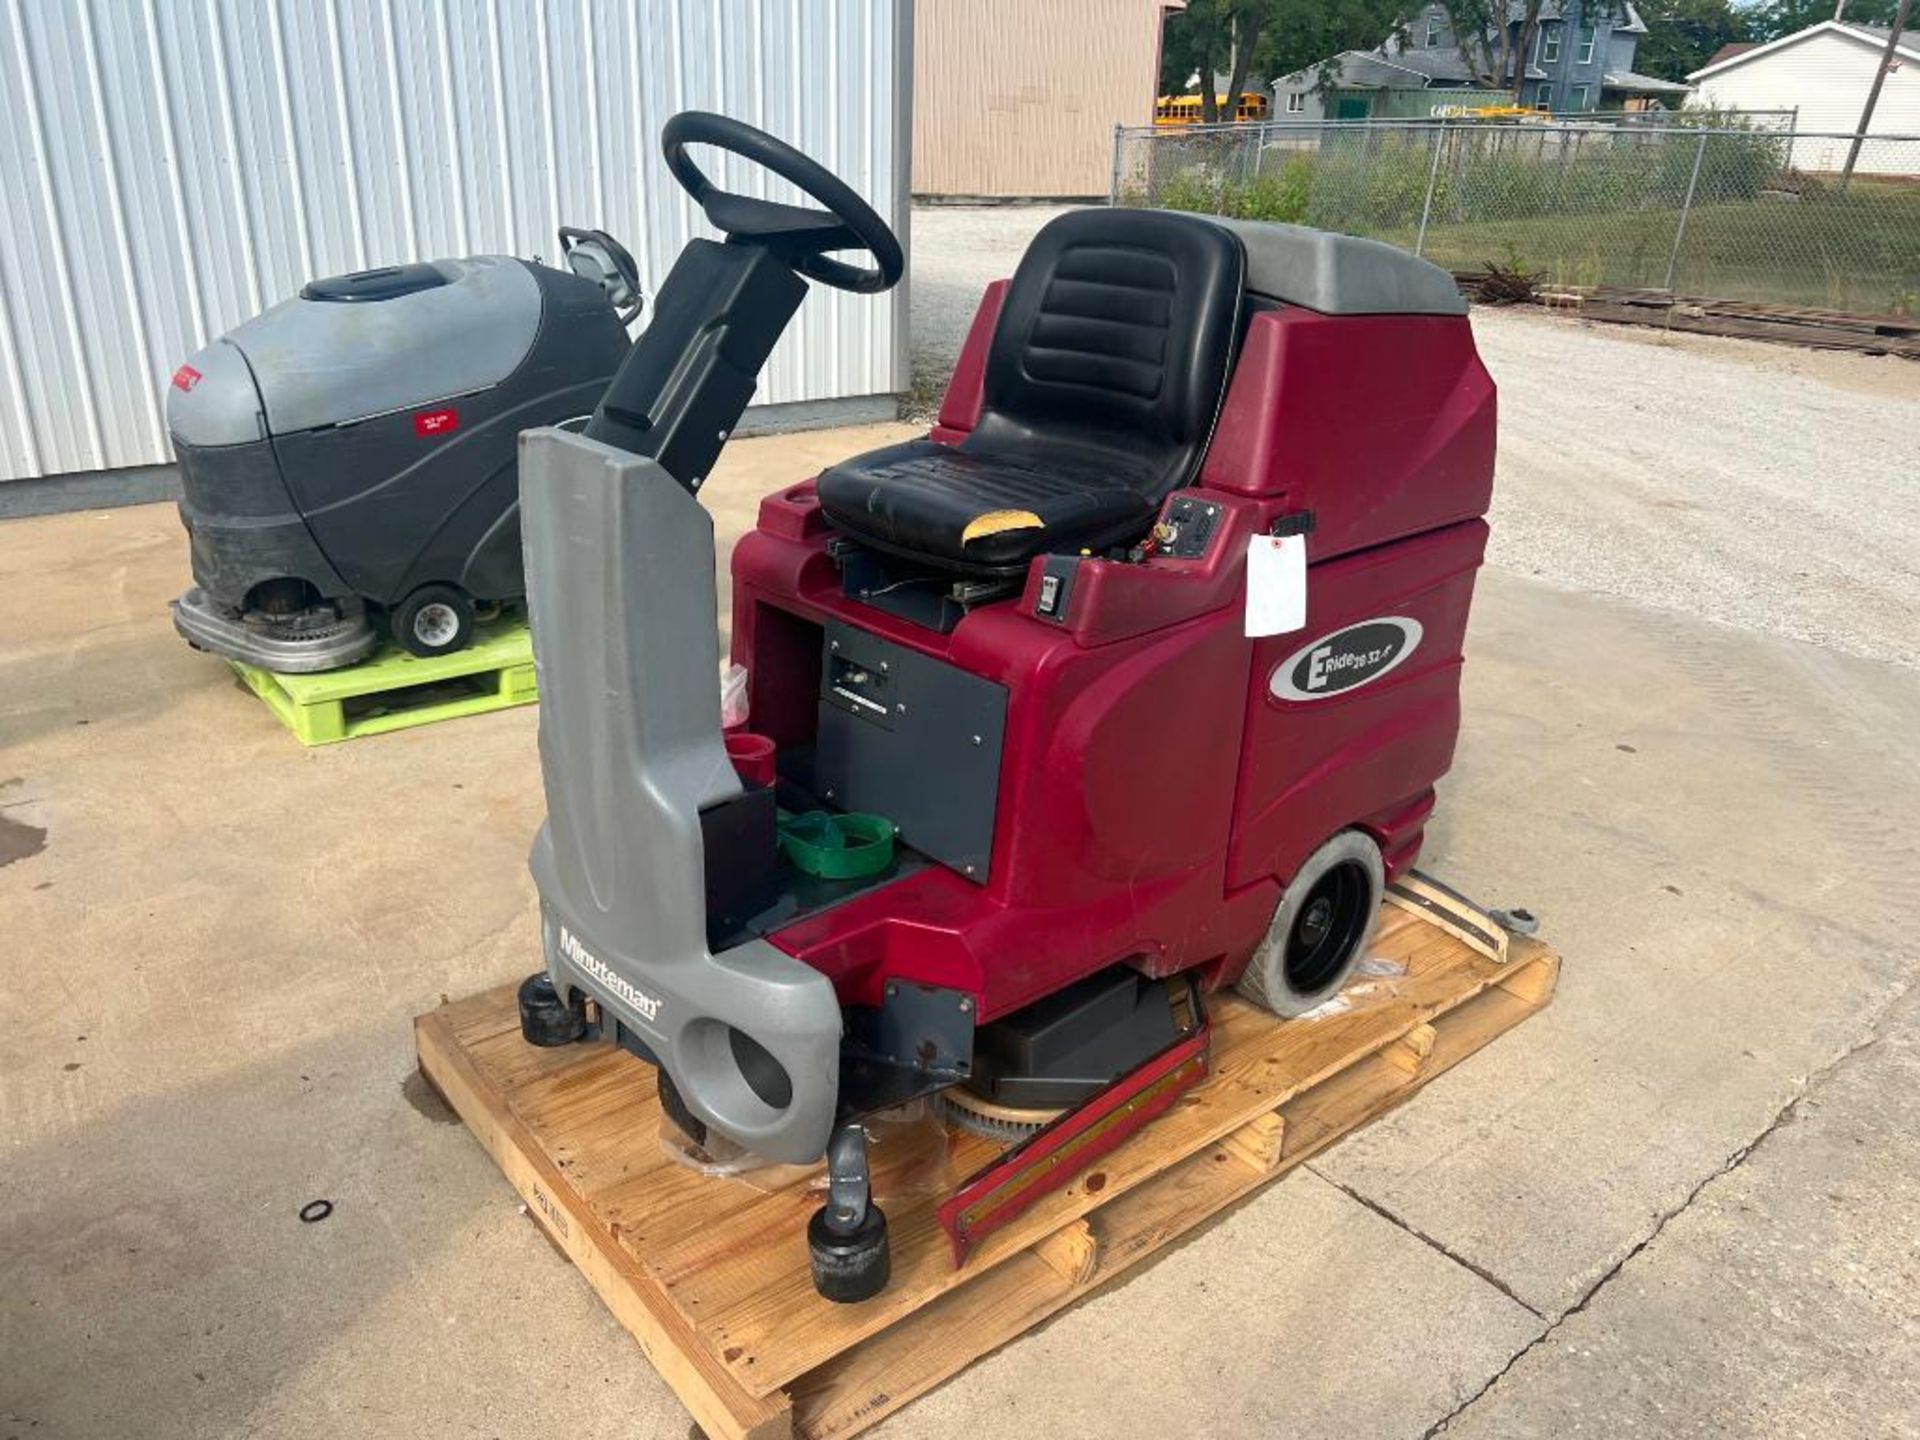 Eride 2832 Rider Floor Scrubber, 8826 Hours, Model ER28D, Serial #13050514, 36 DC Volts. Located in